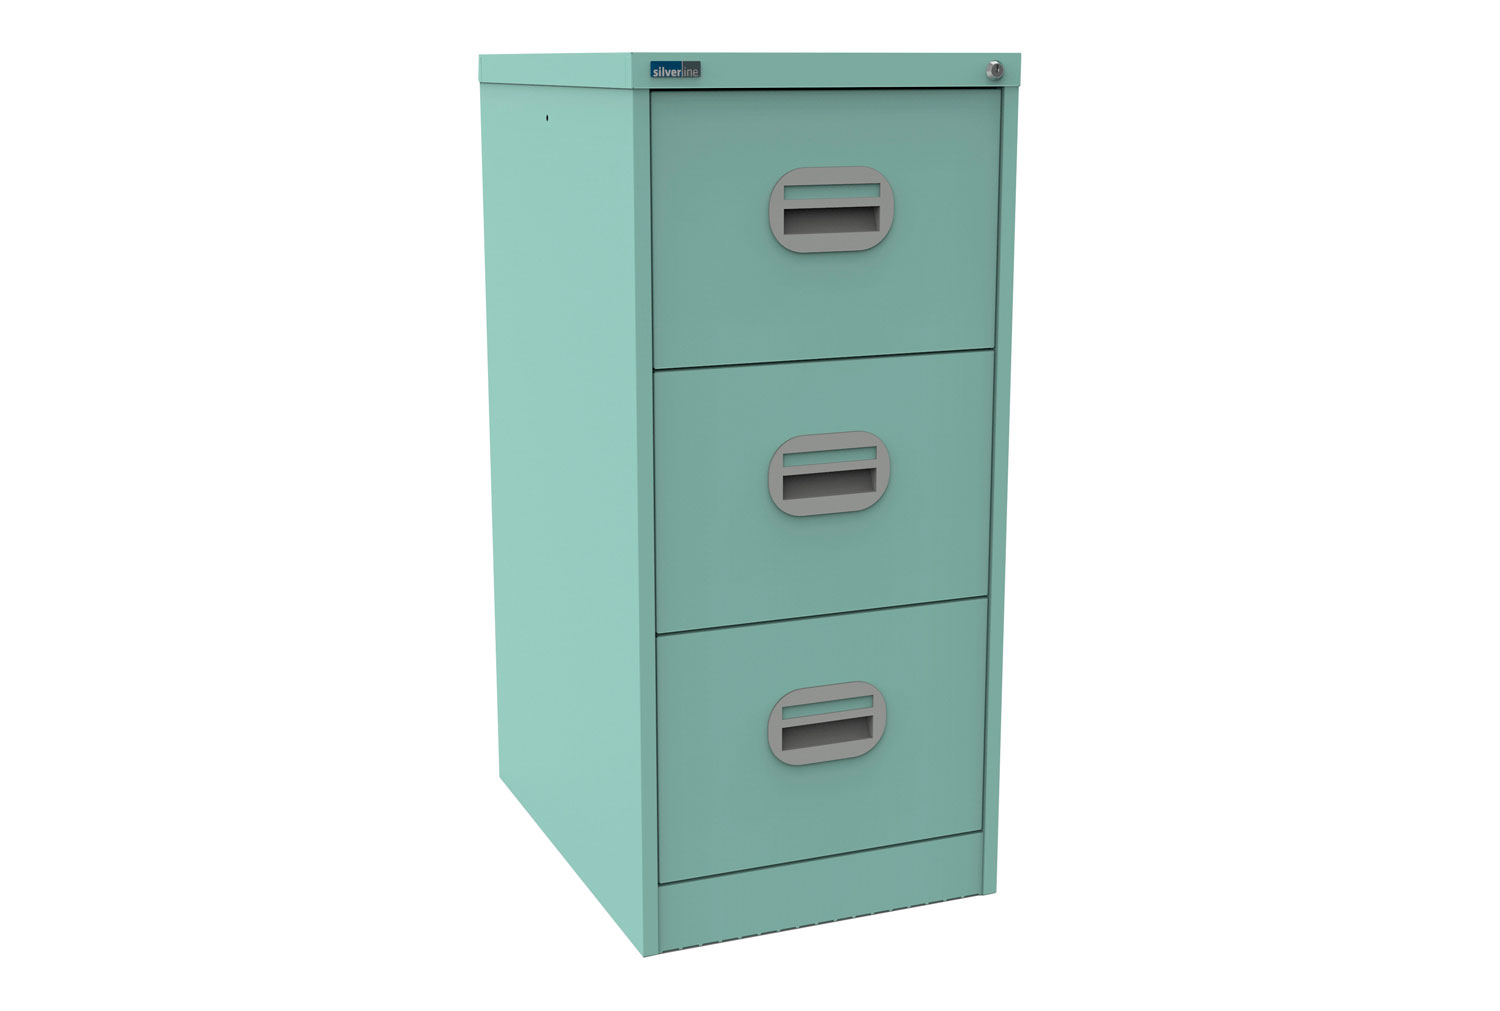 Silverline Kontrax 3 Drawer Filing Cabinet, 3 Drawer - 46wx62dx101h (cm), Peppermint